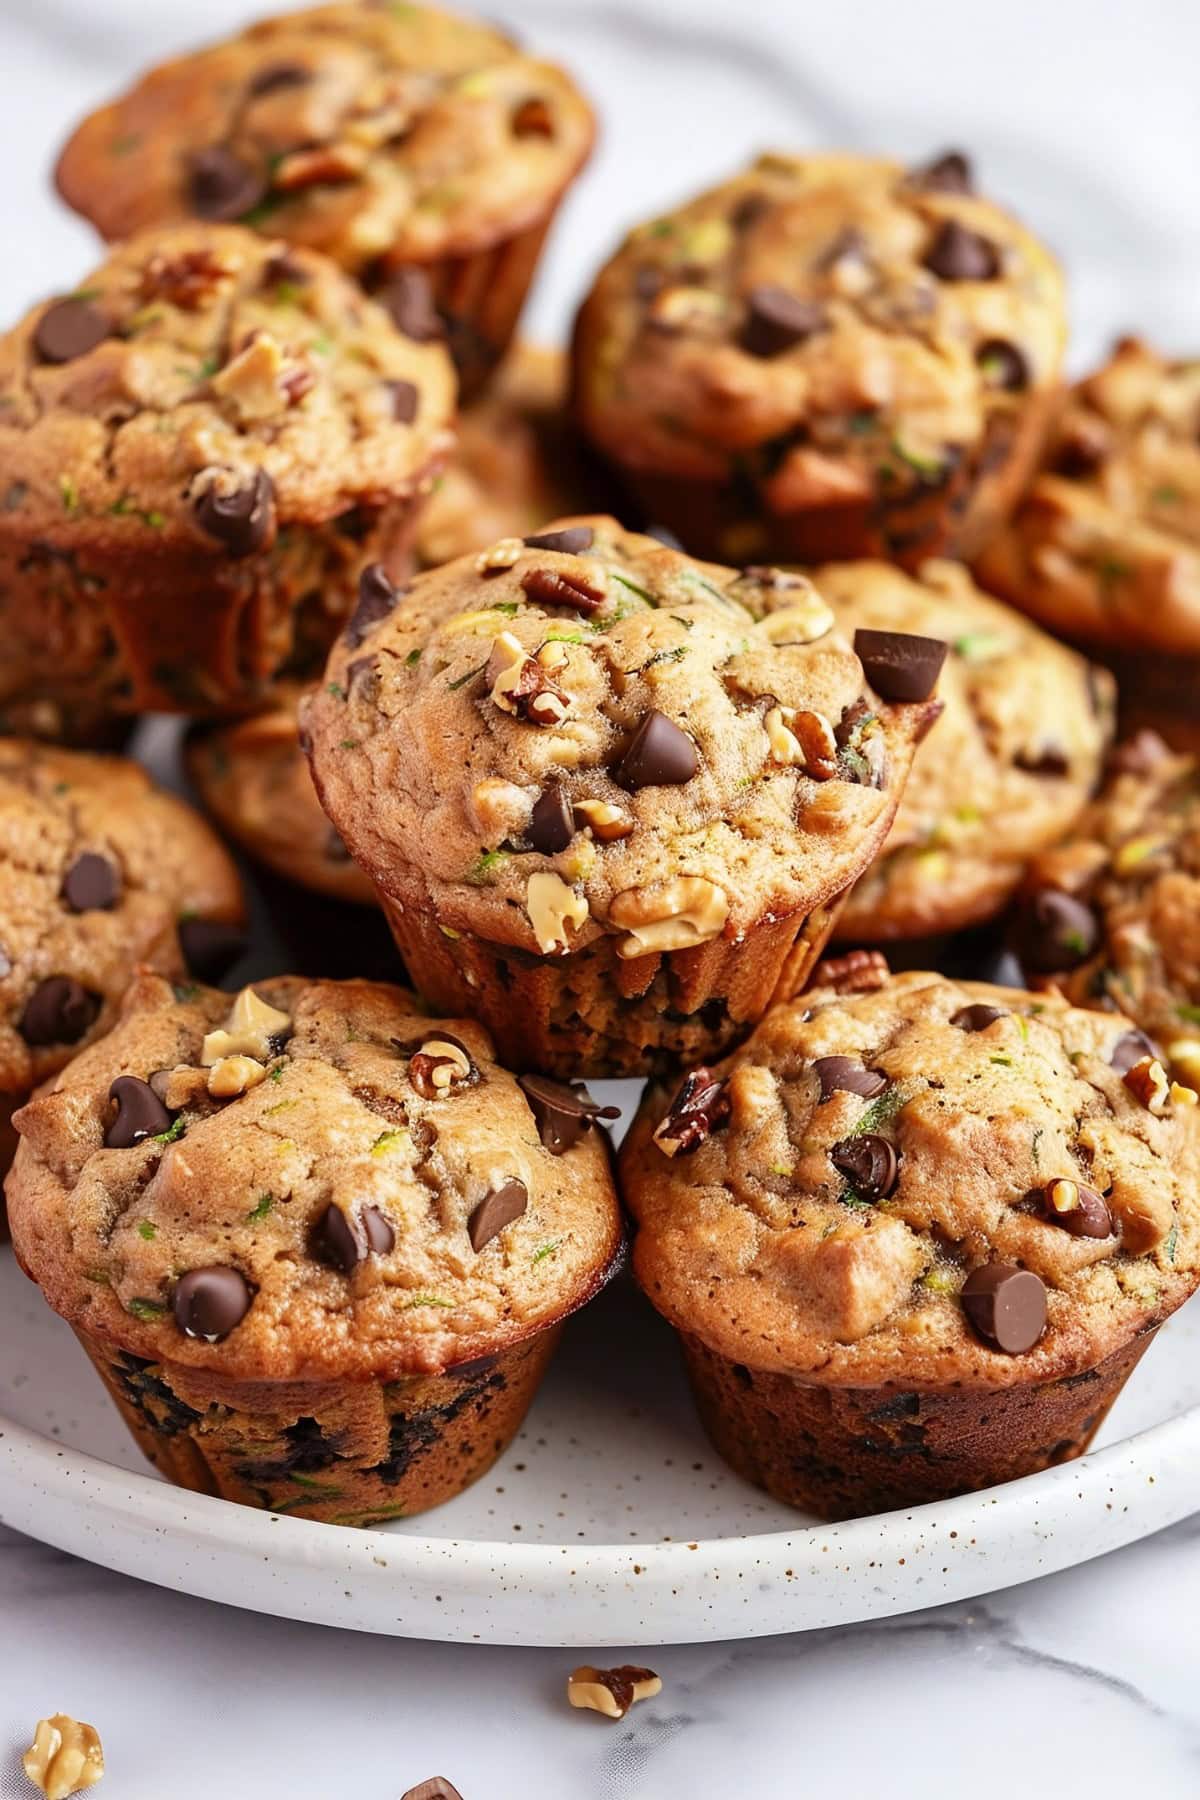 Close Up Stack of Zucchini Chocolate Chip Muffins with Chocolate Chips, Walnuts, and Pieces of Visible Zucchini